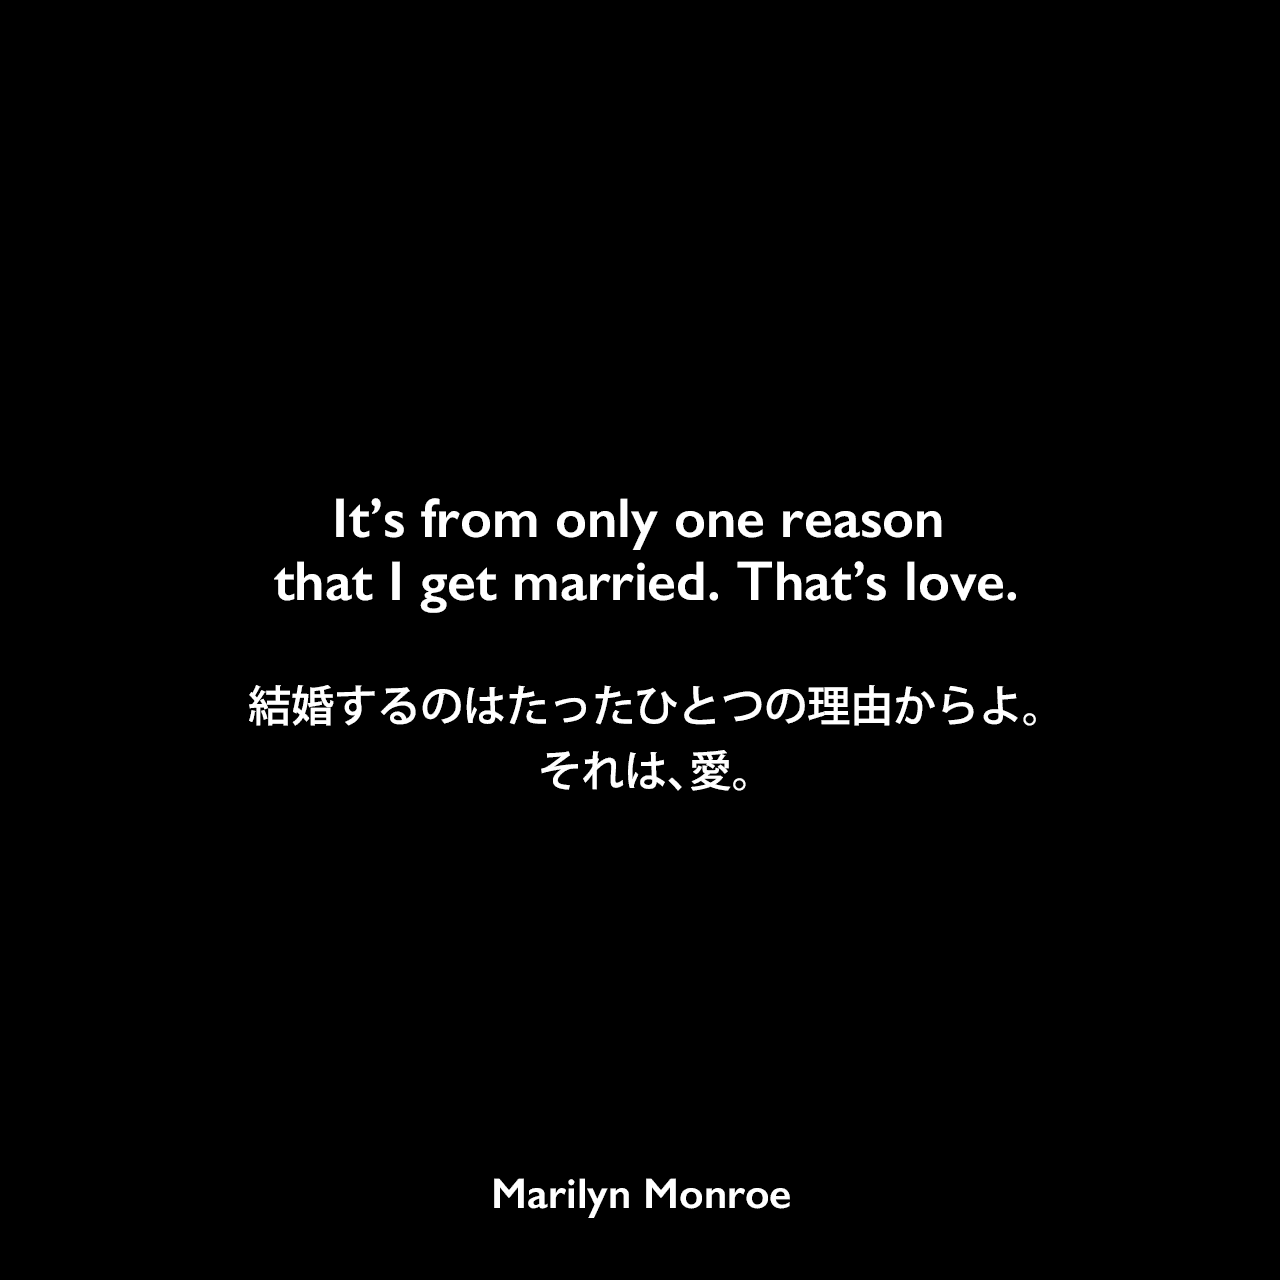 It’s from only one reason that I get married. That’s love.結婚するのはたったひとつの理由からよ。それは、愛。